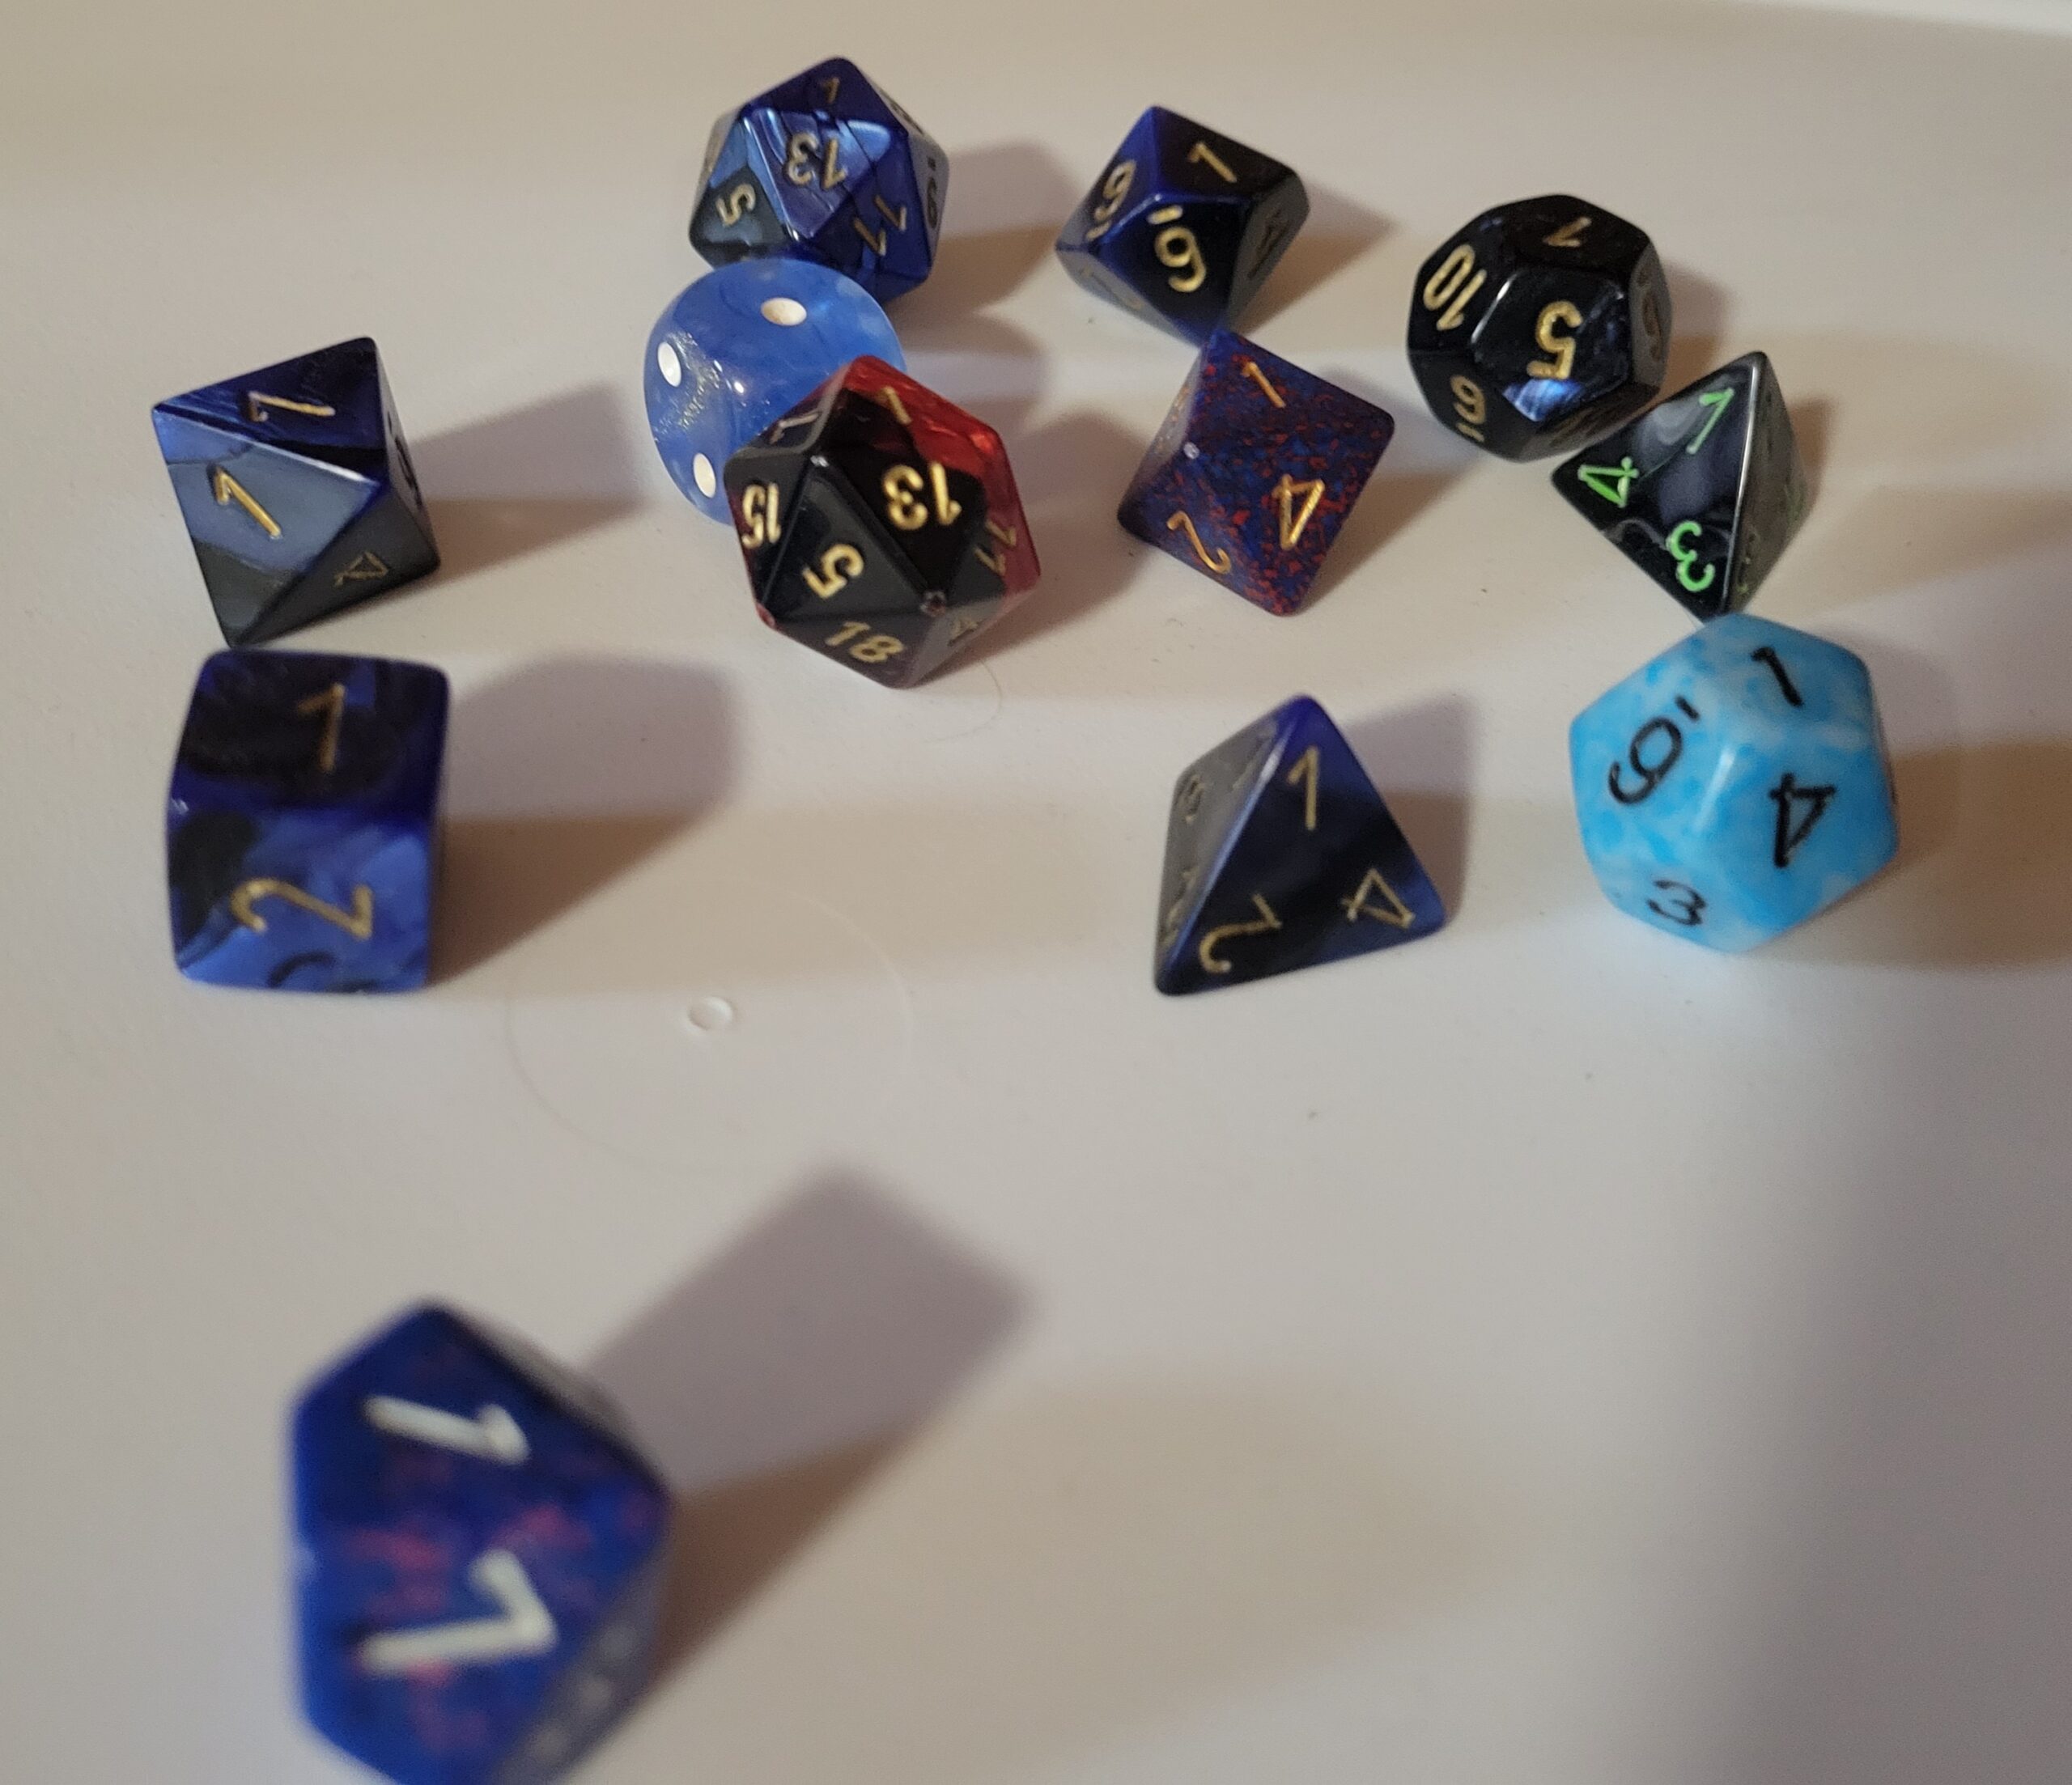 Many shapes of blue dice, all showing that they've rolled the number 1 (except one that accidentally is showing a 7 due to photographer error!)